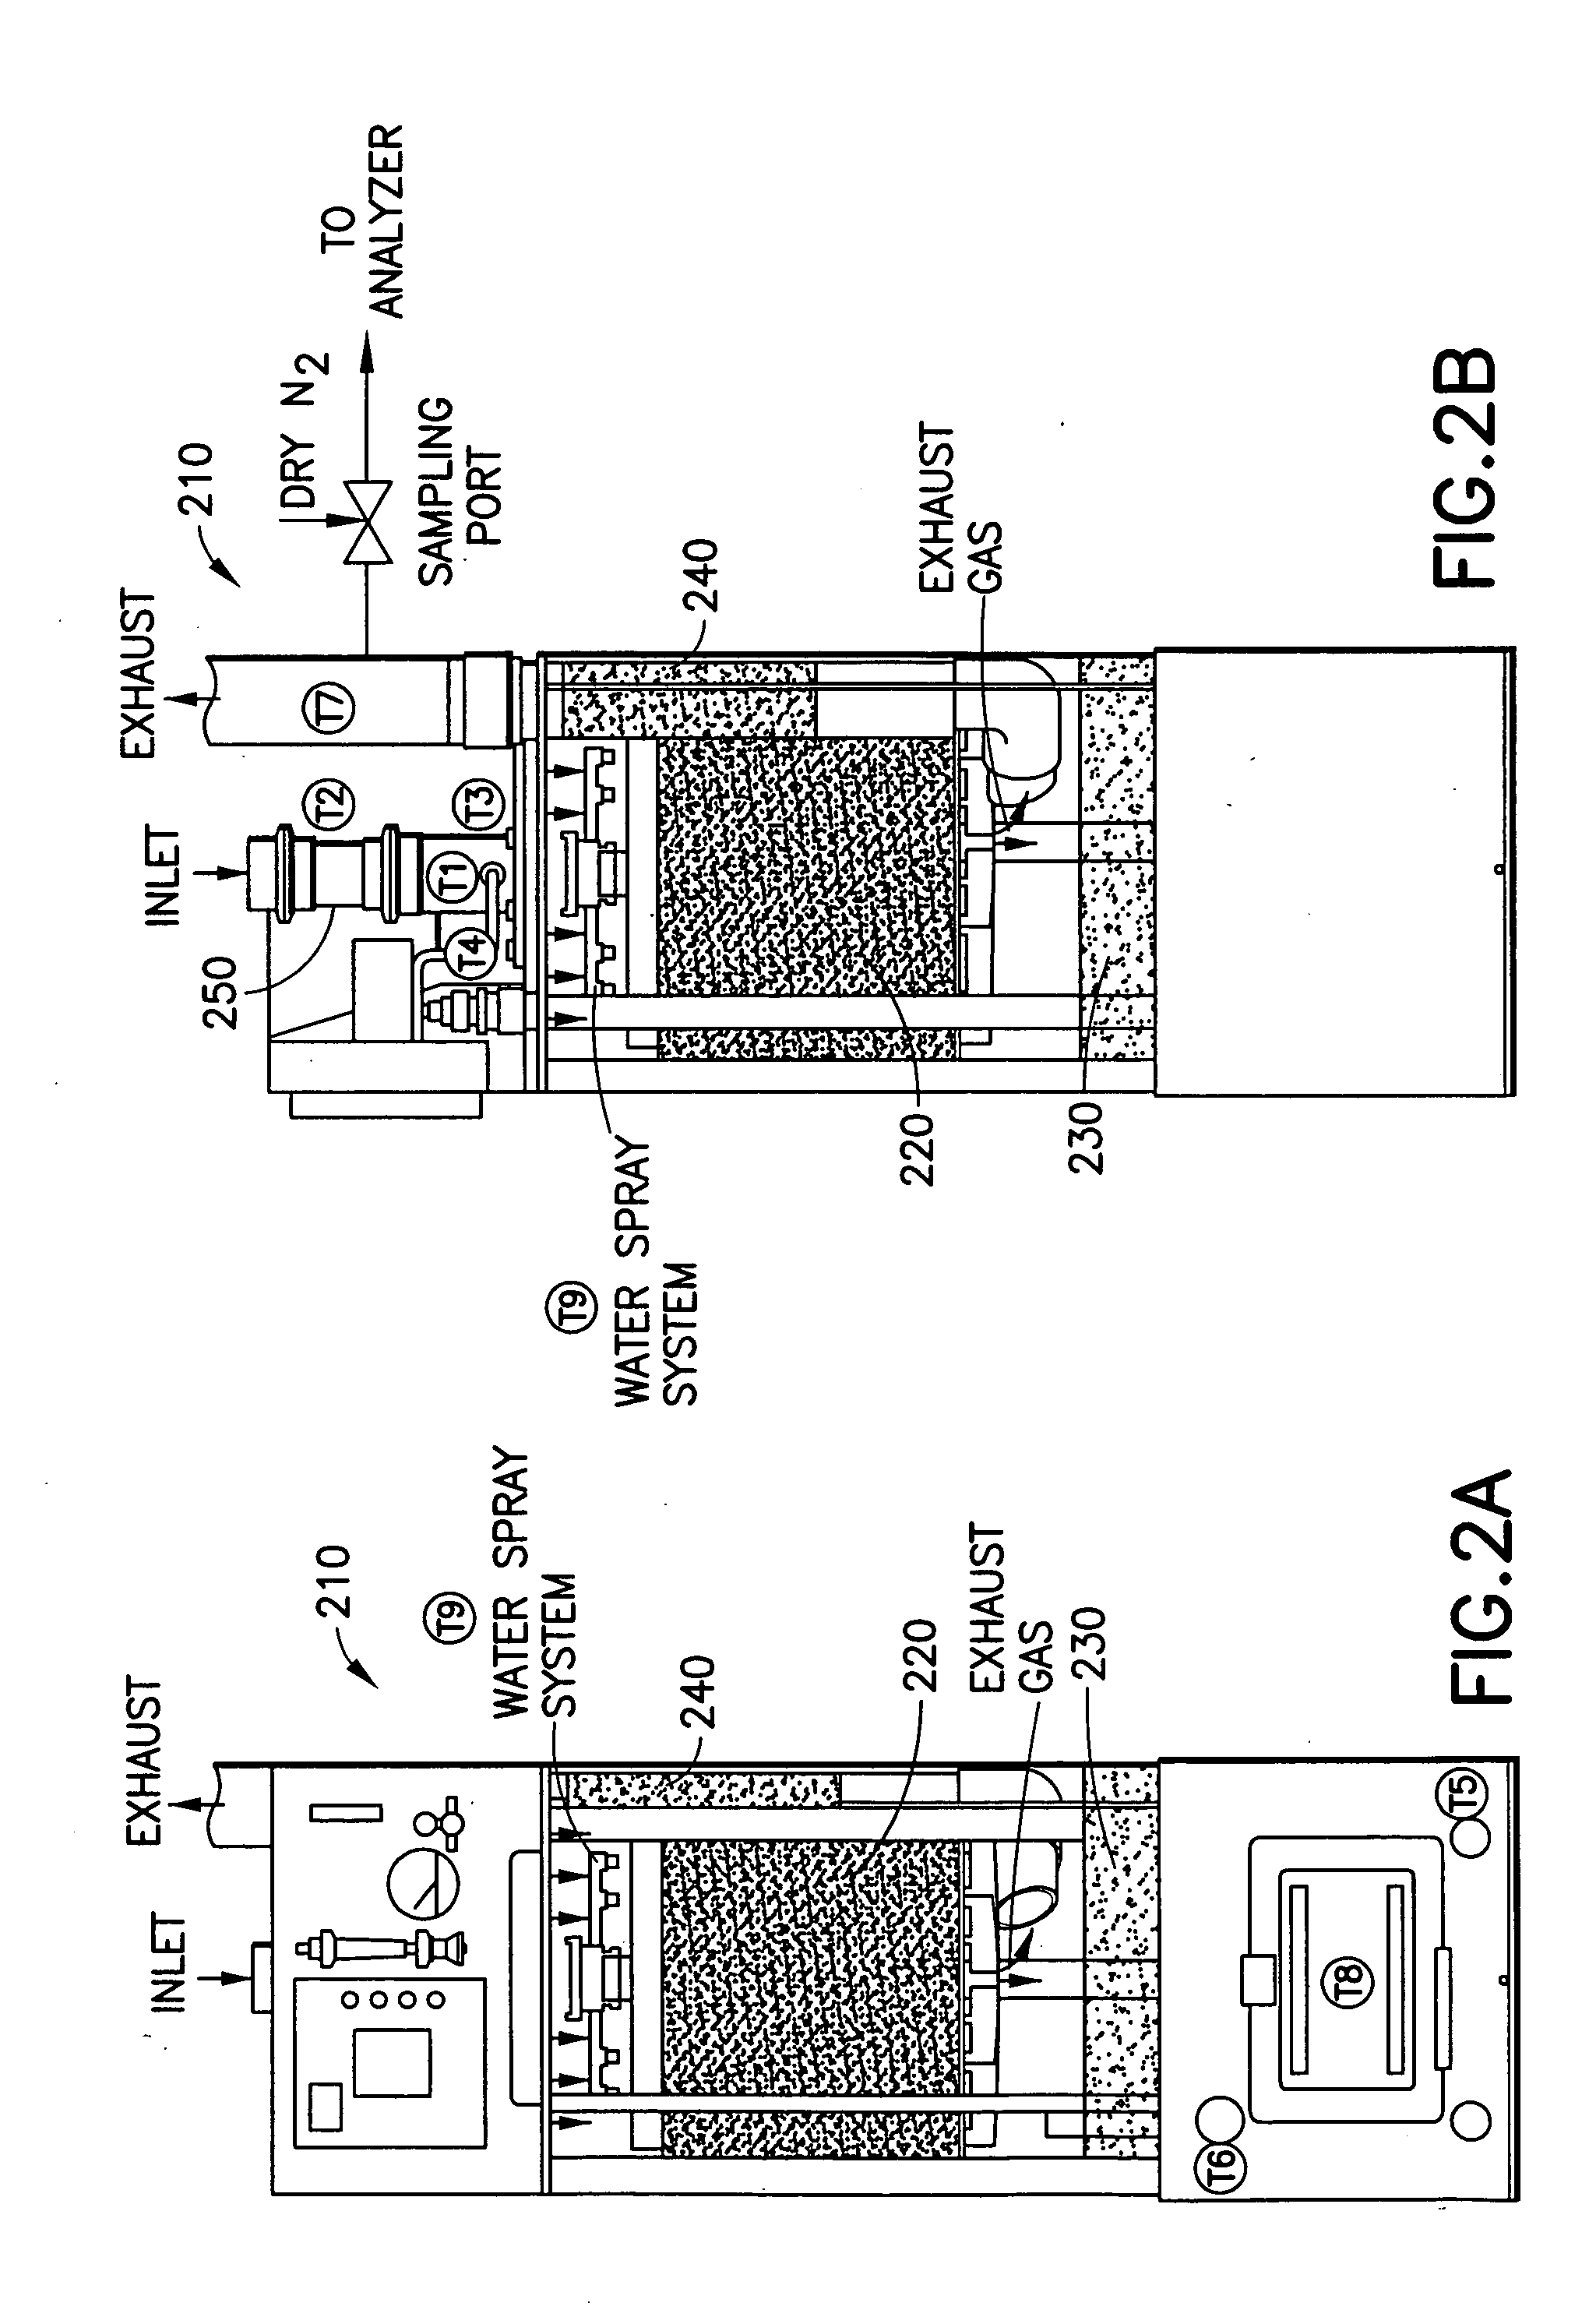 Apparatus and method for point-of-use treatment of effluent gas streams